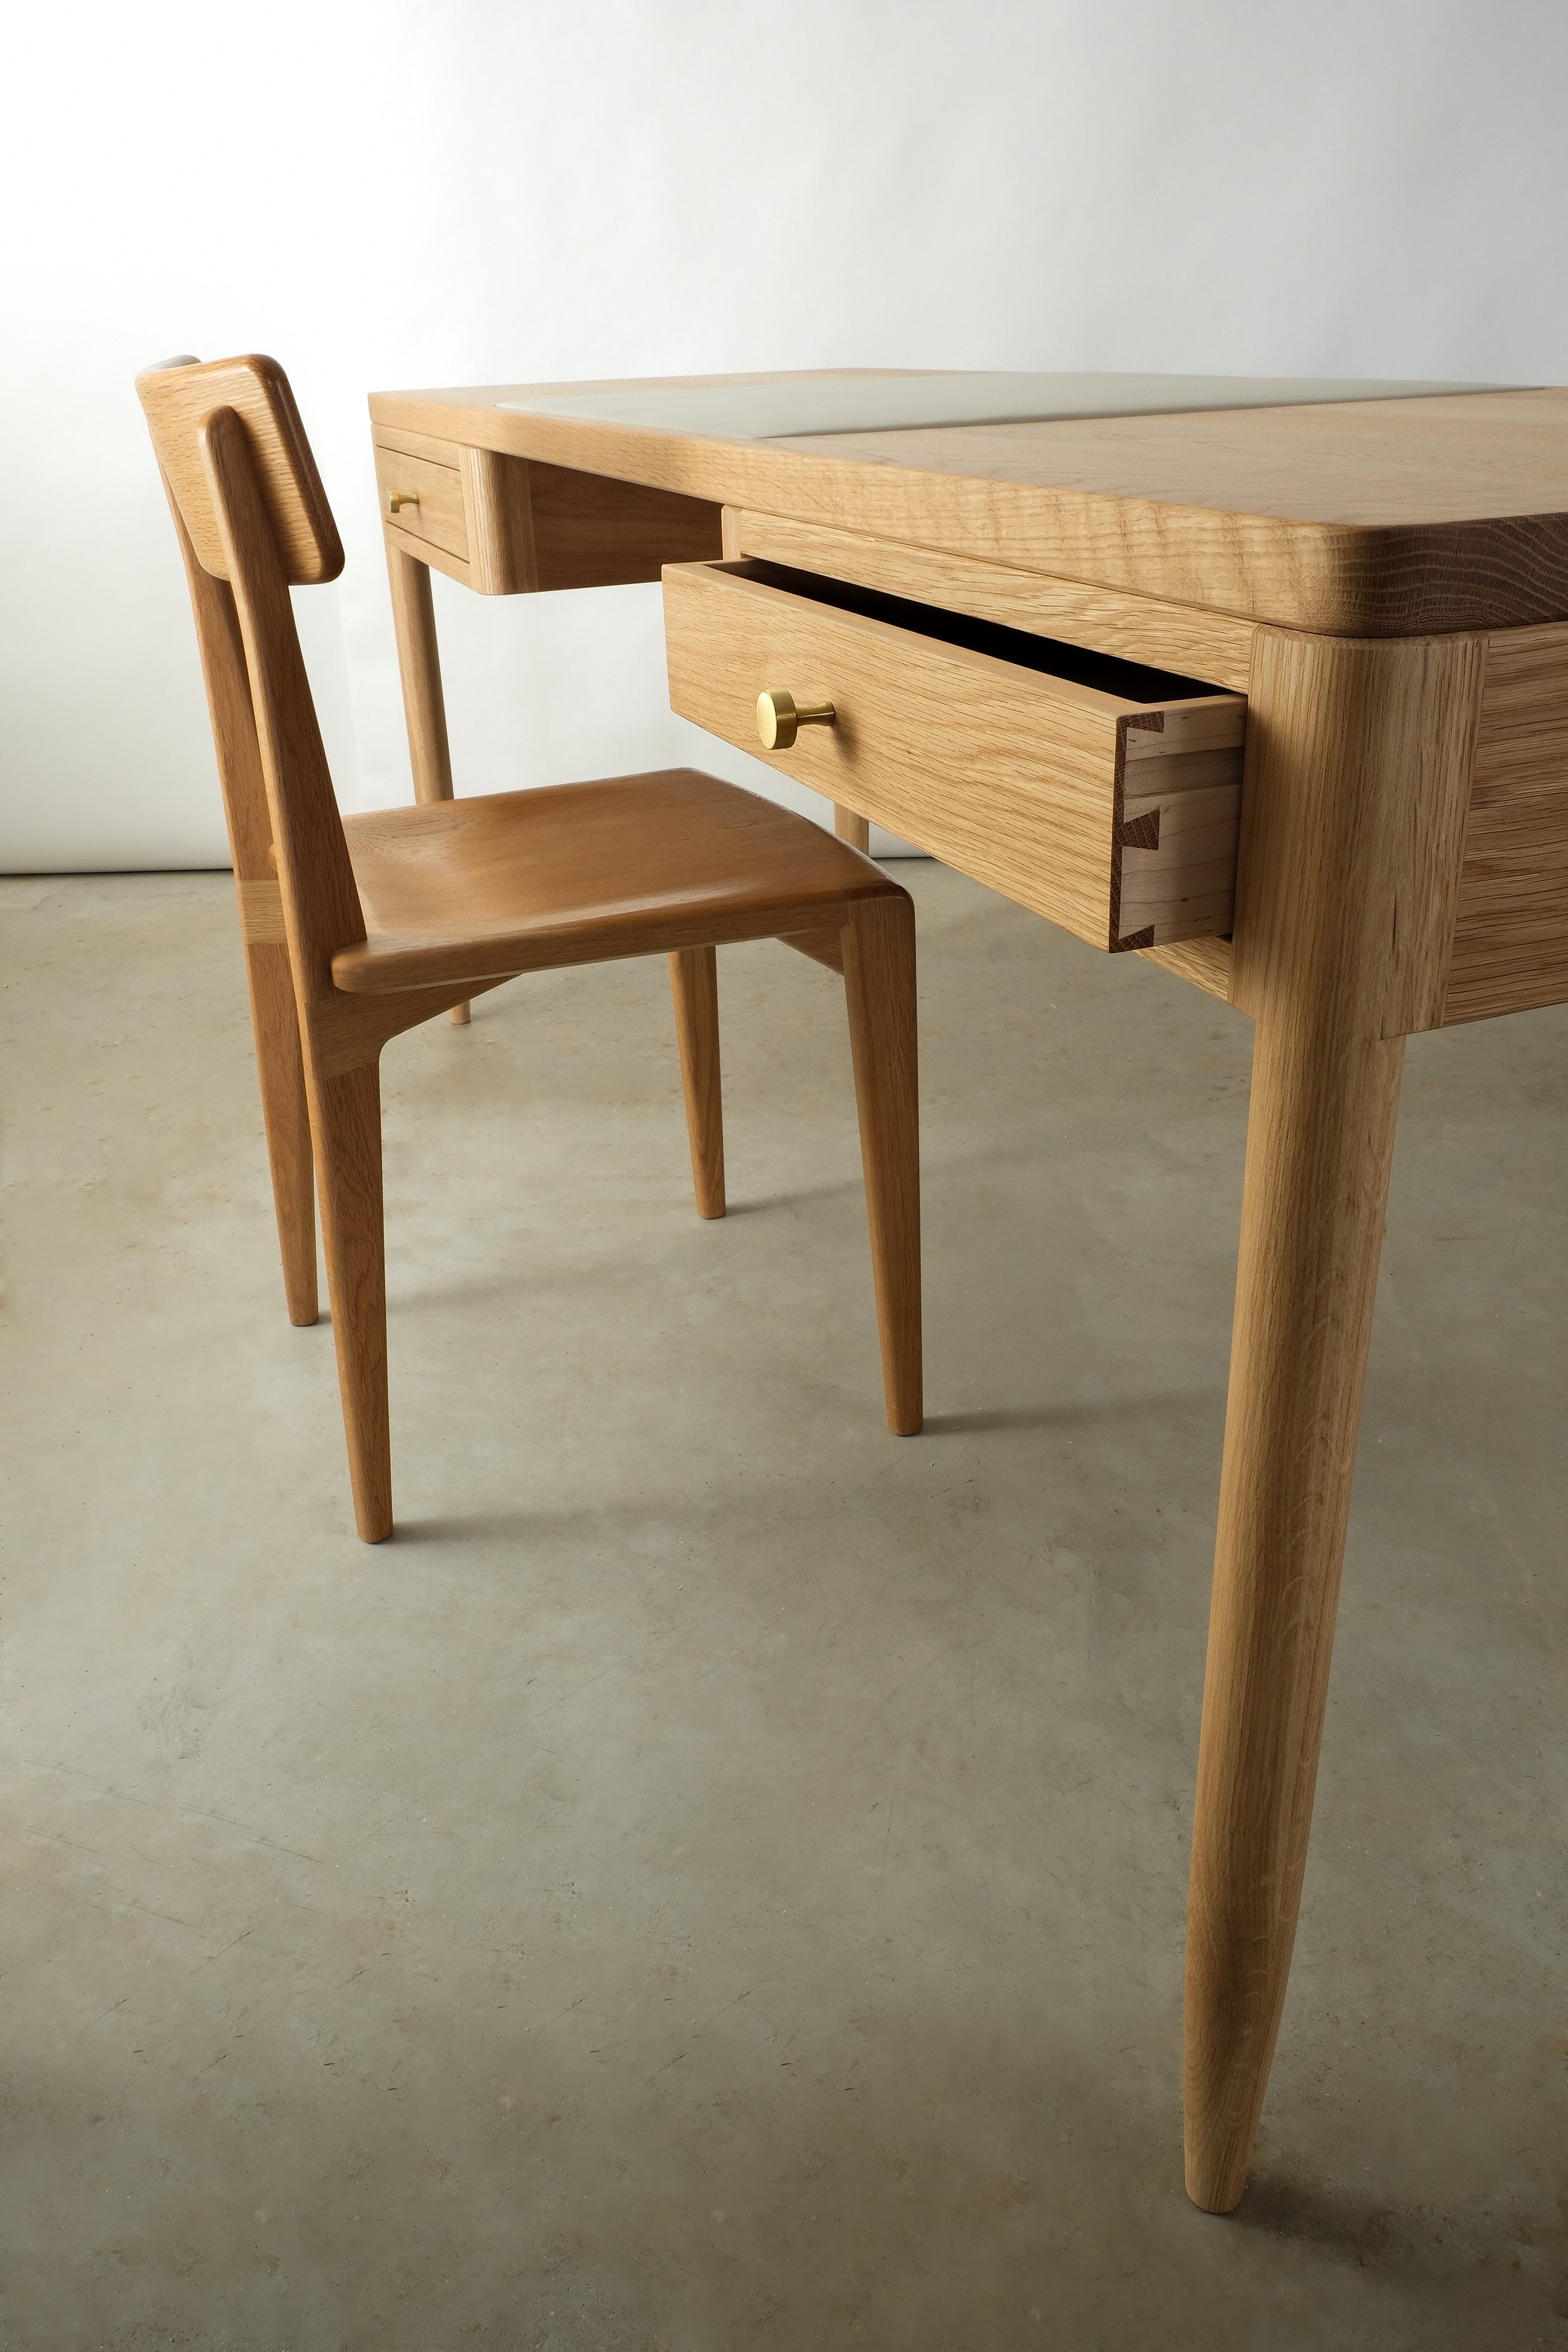 baxter desk with chair:dovetail details.JPG